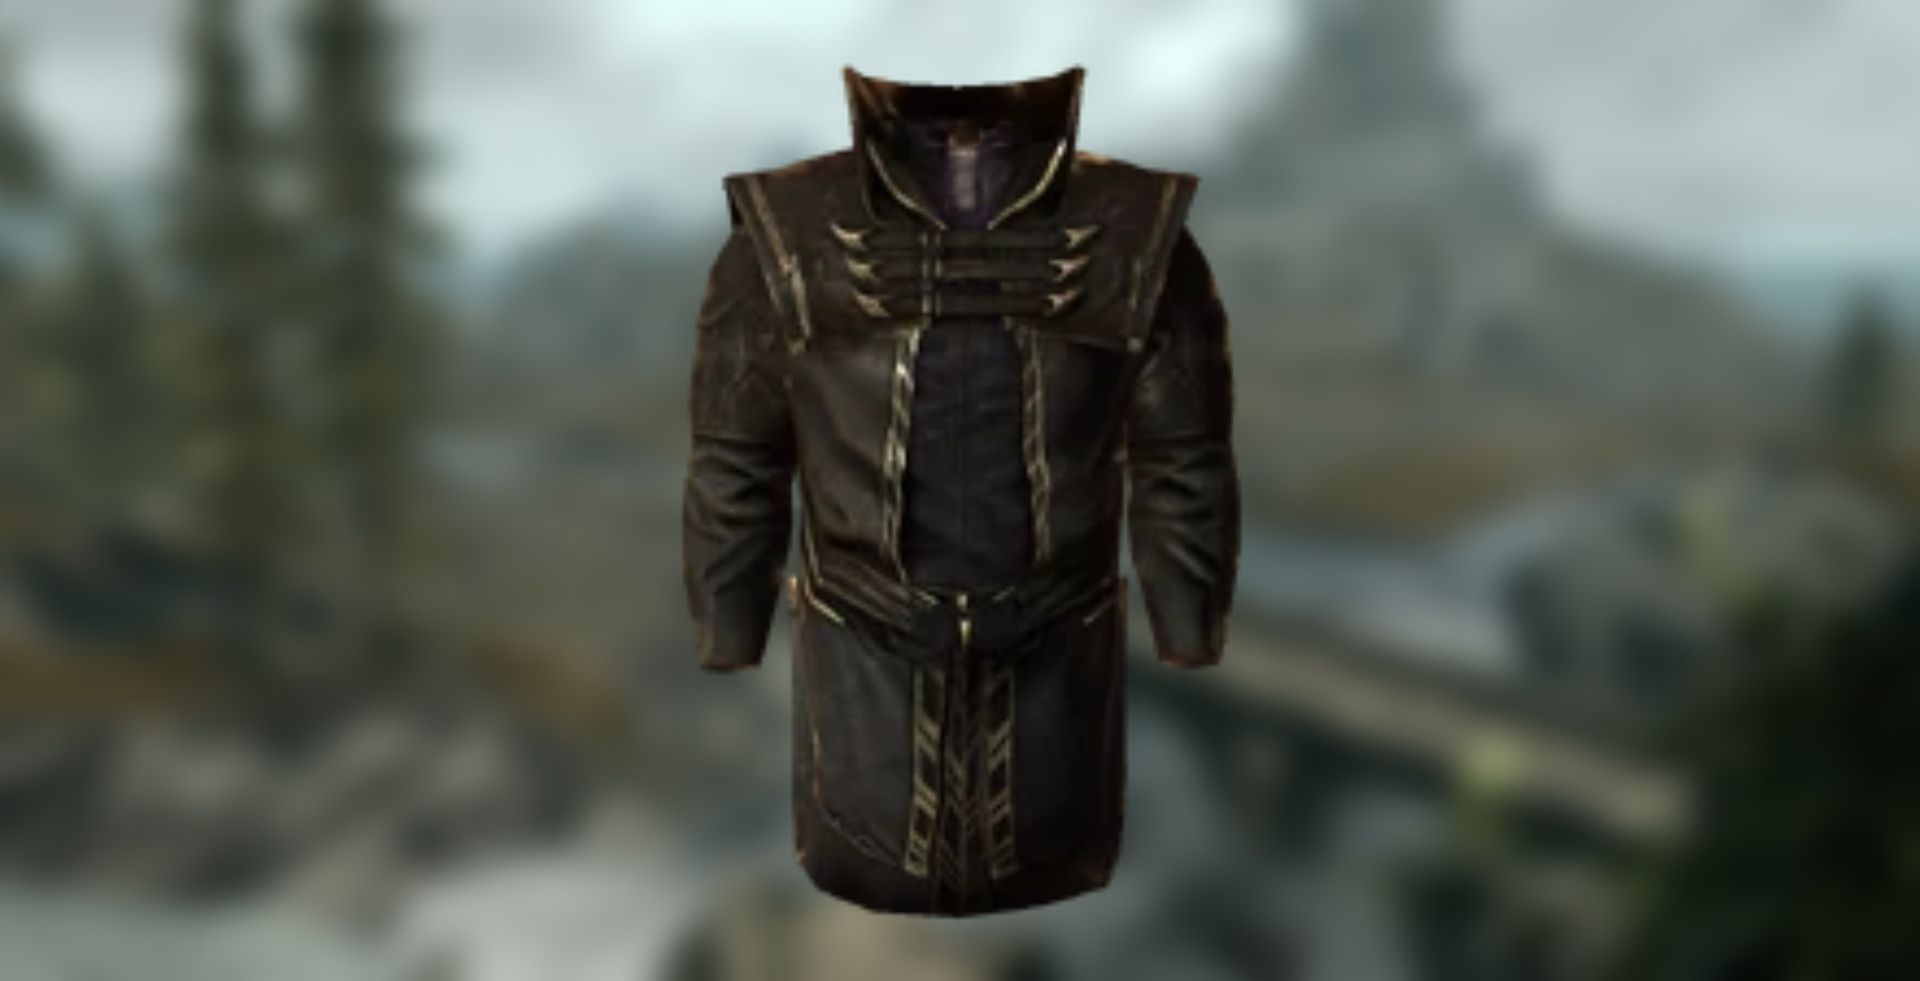 A render of a set of Thalmor robes against a blurry screenshot of Skyrim.